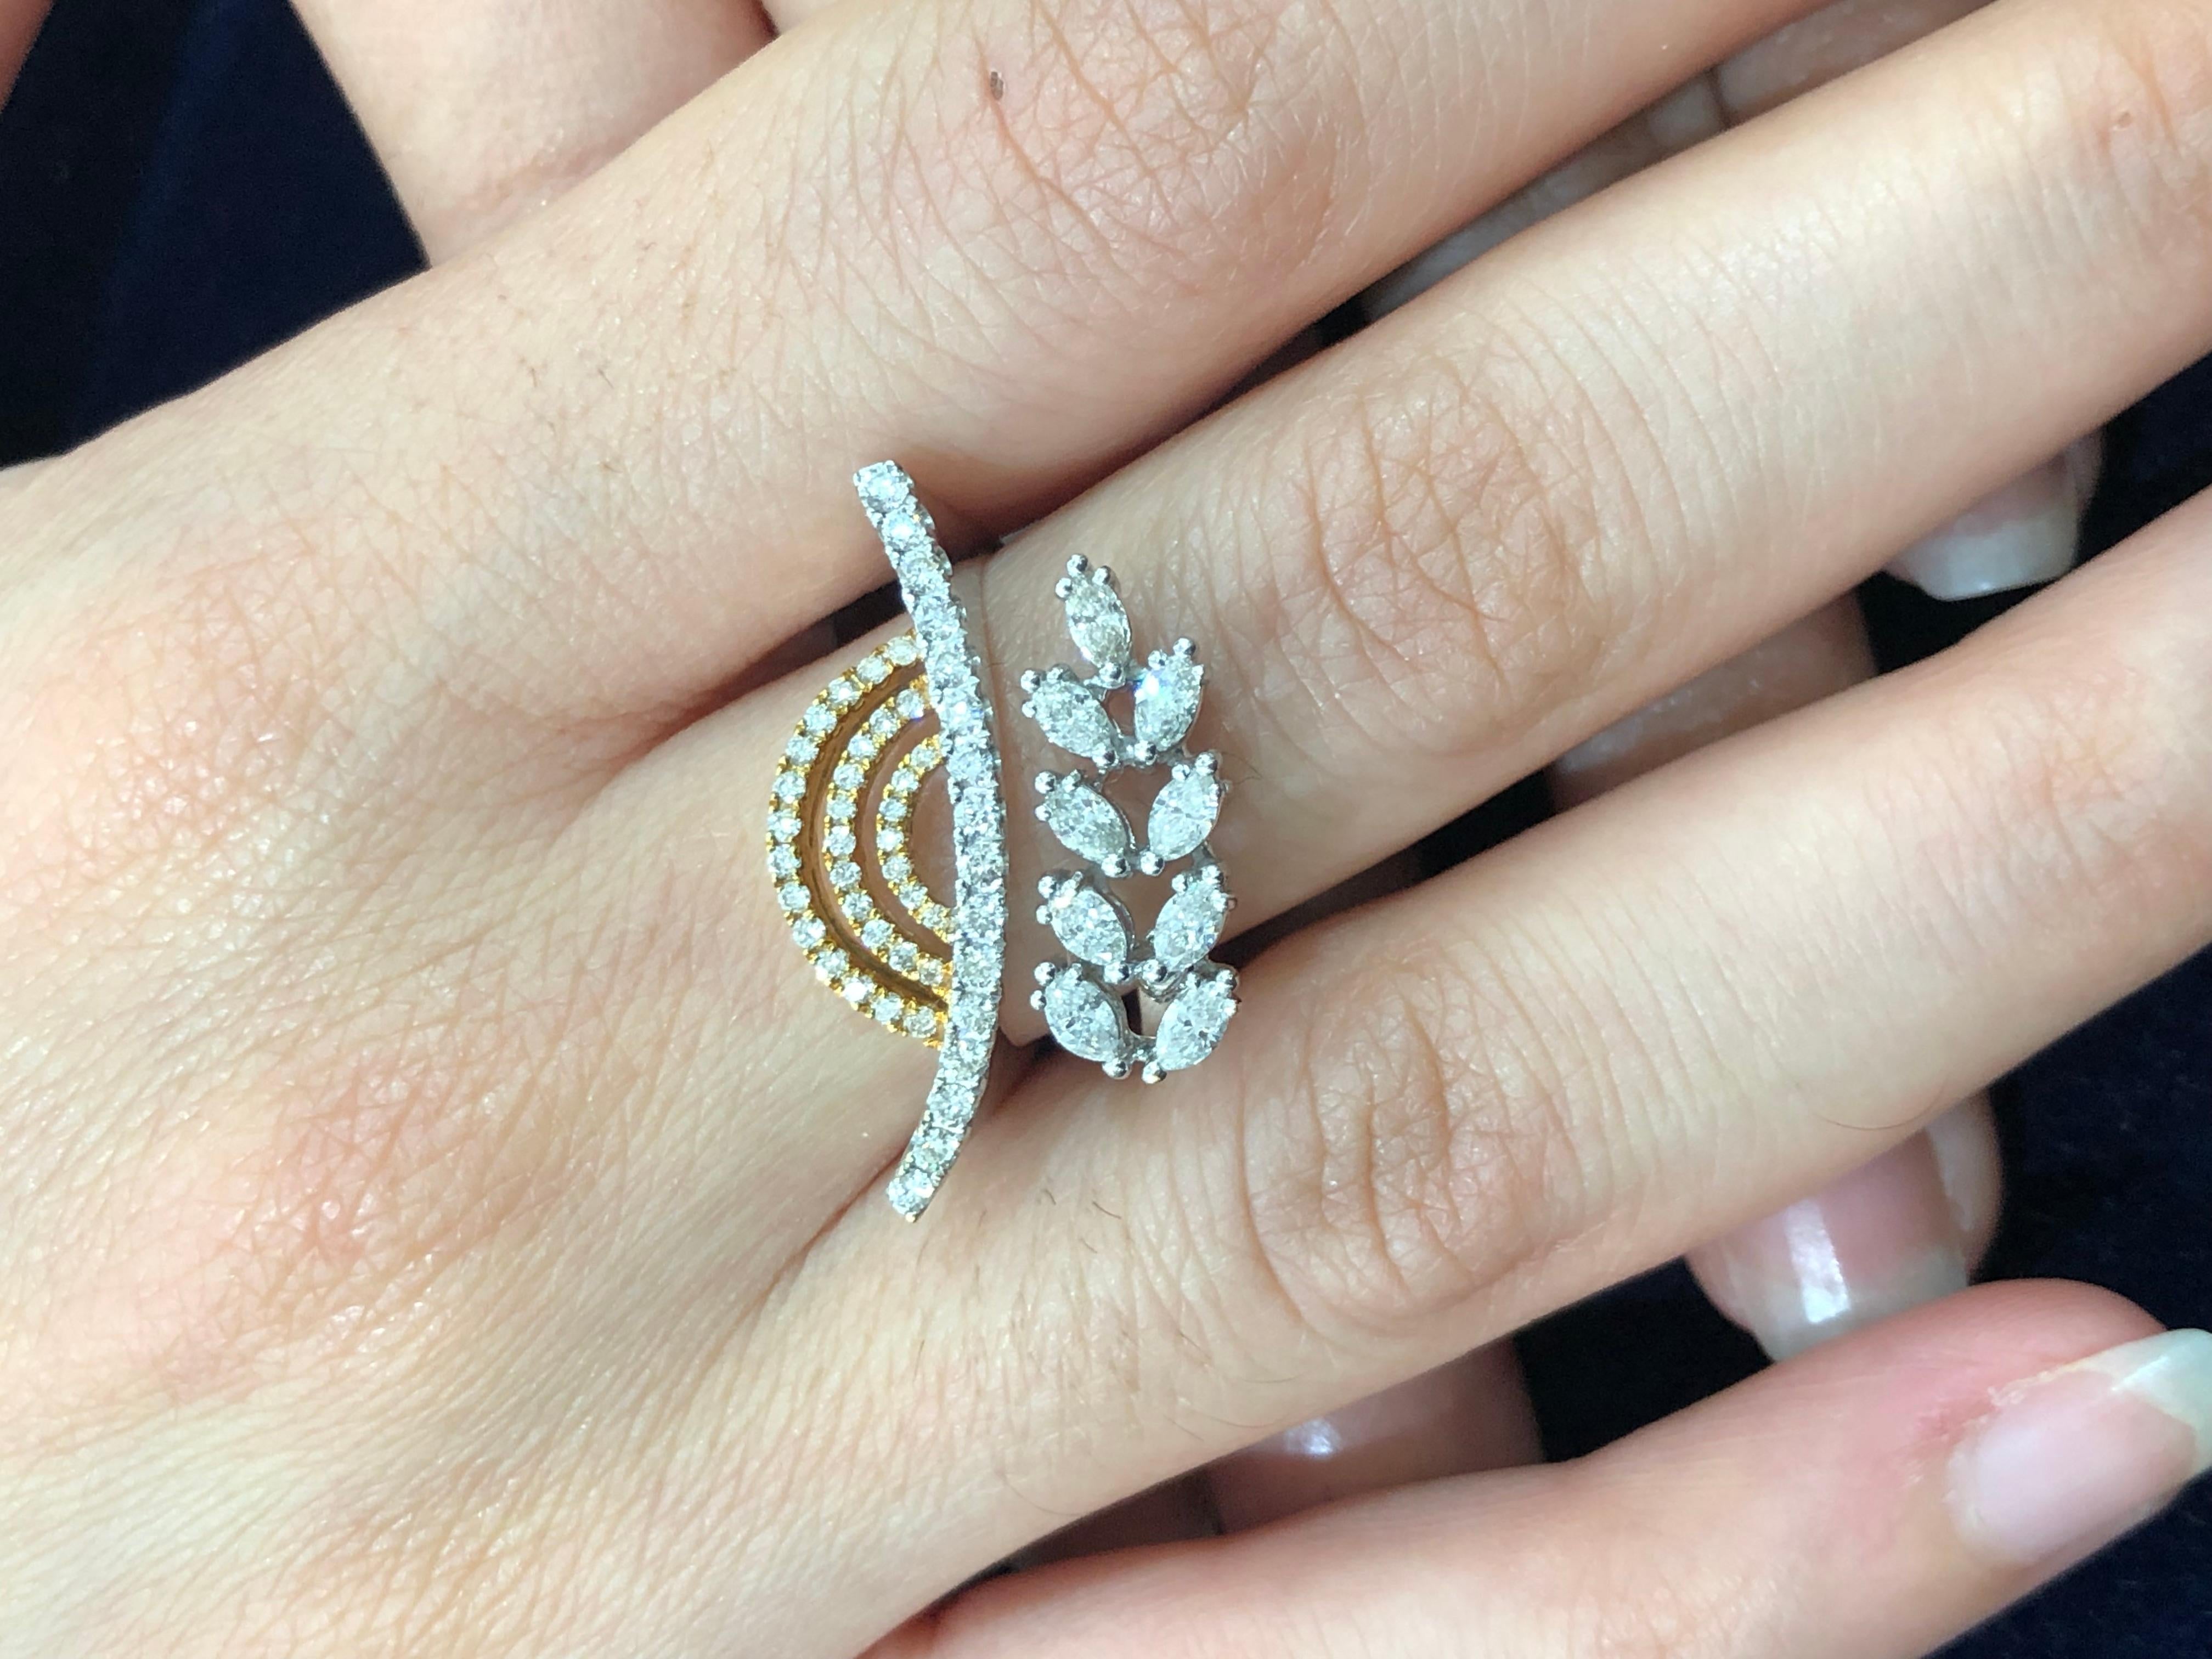 Diamonds - 1.03 Carat
18kt Gold -7.909 grams
Ref No - DR-FDG
 
Nothing like twinkling diamonds around that finger to make a stylish statement.